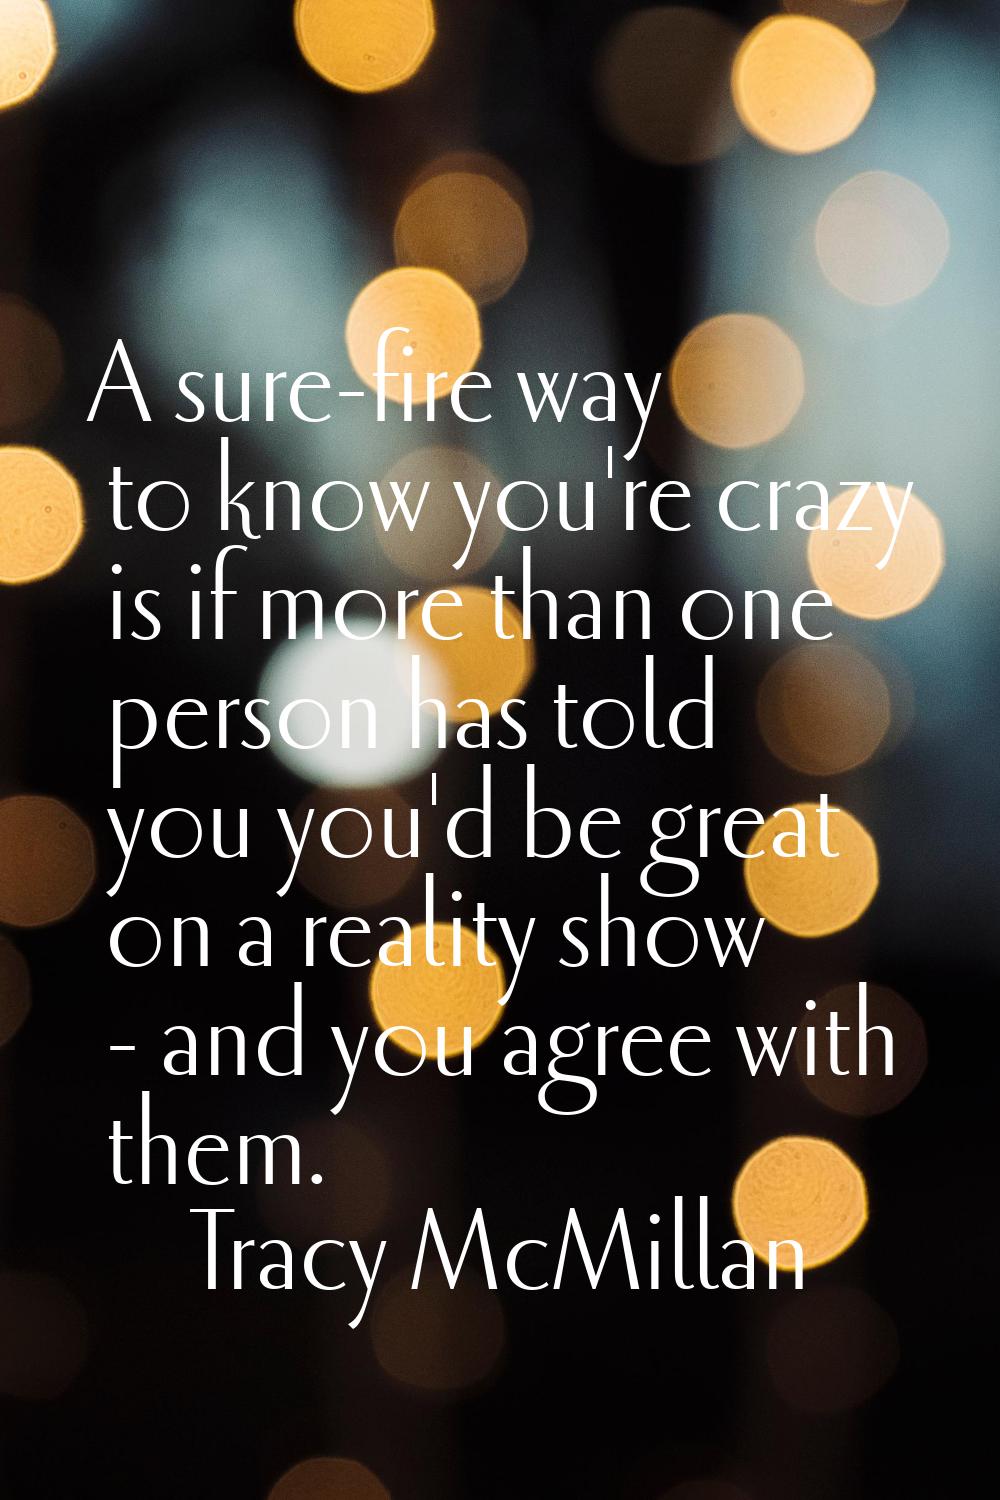 A sure-fire way to know you're crazy is if more than one person has told you you'd be great on a re